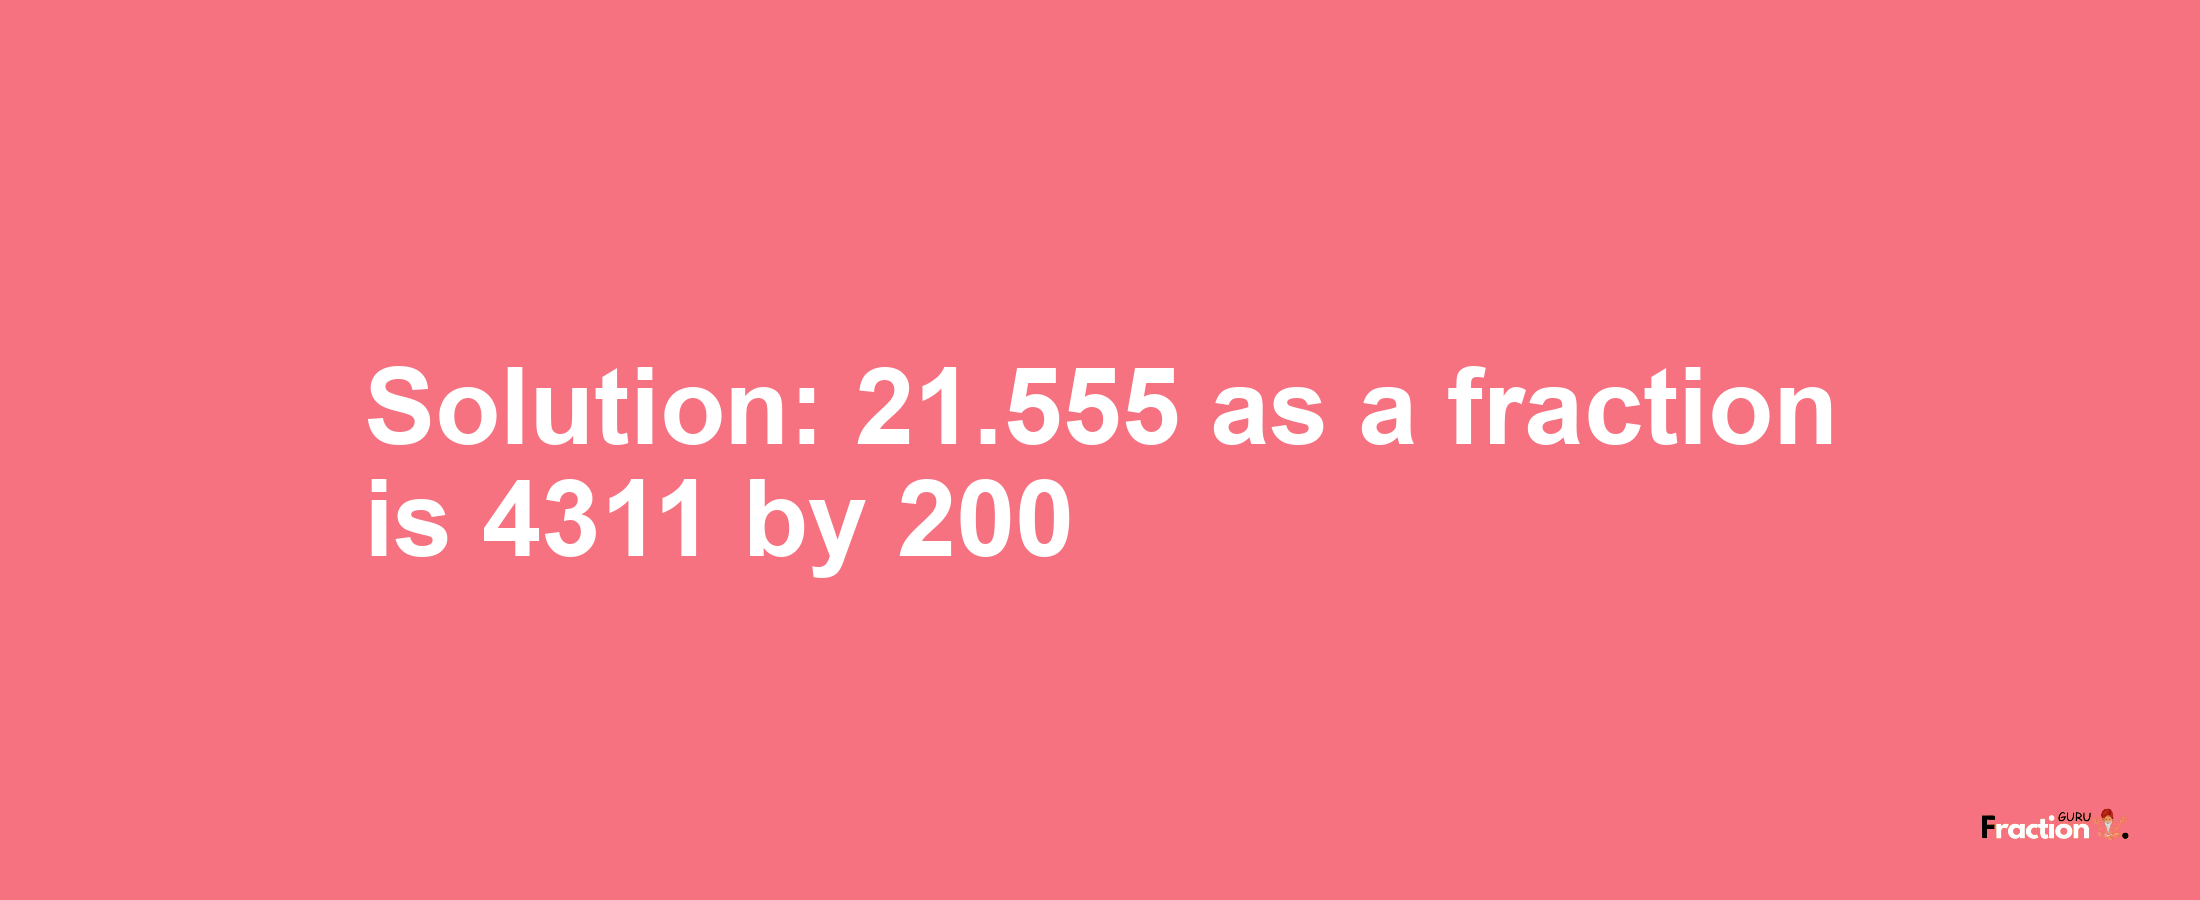 Solution:21.555 as a fraction is 4311/200